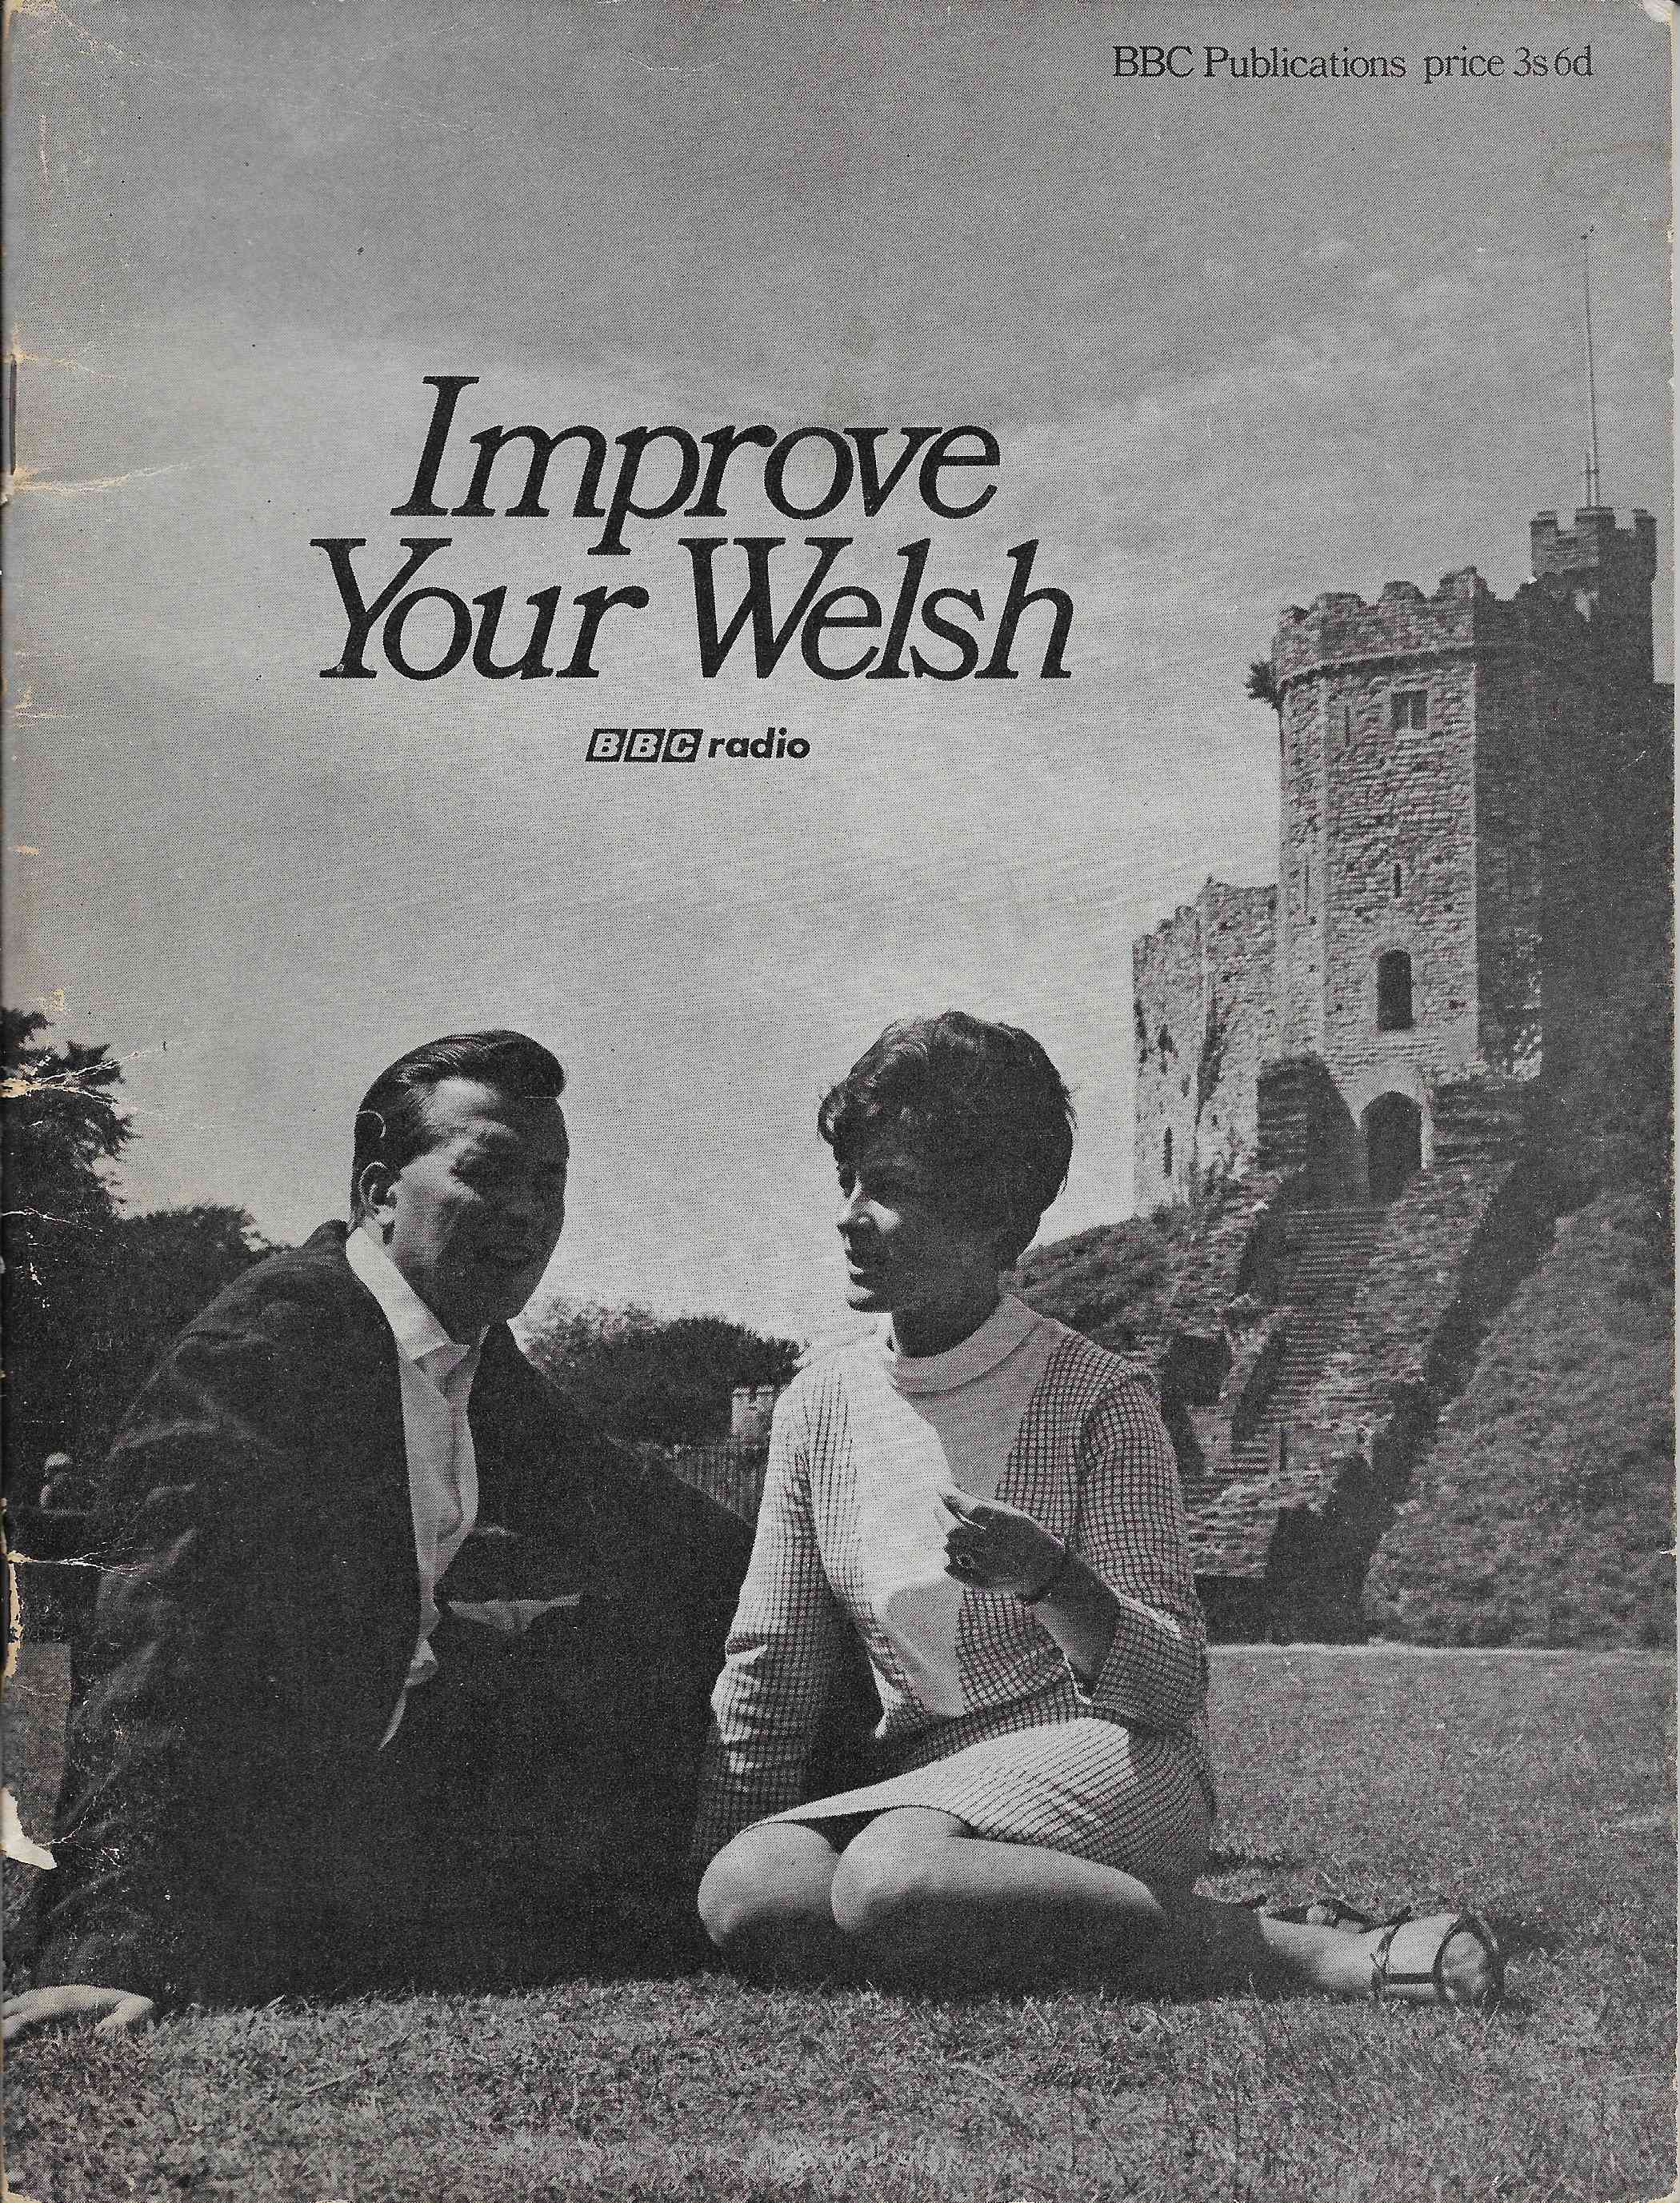 Picture of Improve your Welsh by artist Islwyn Ffowc Elis from the BBC books - Records and Tapes library